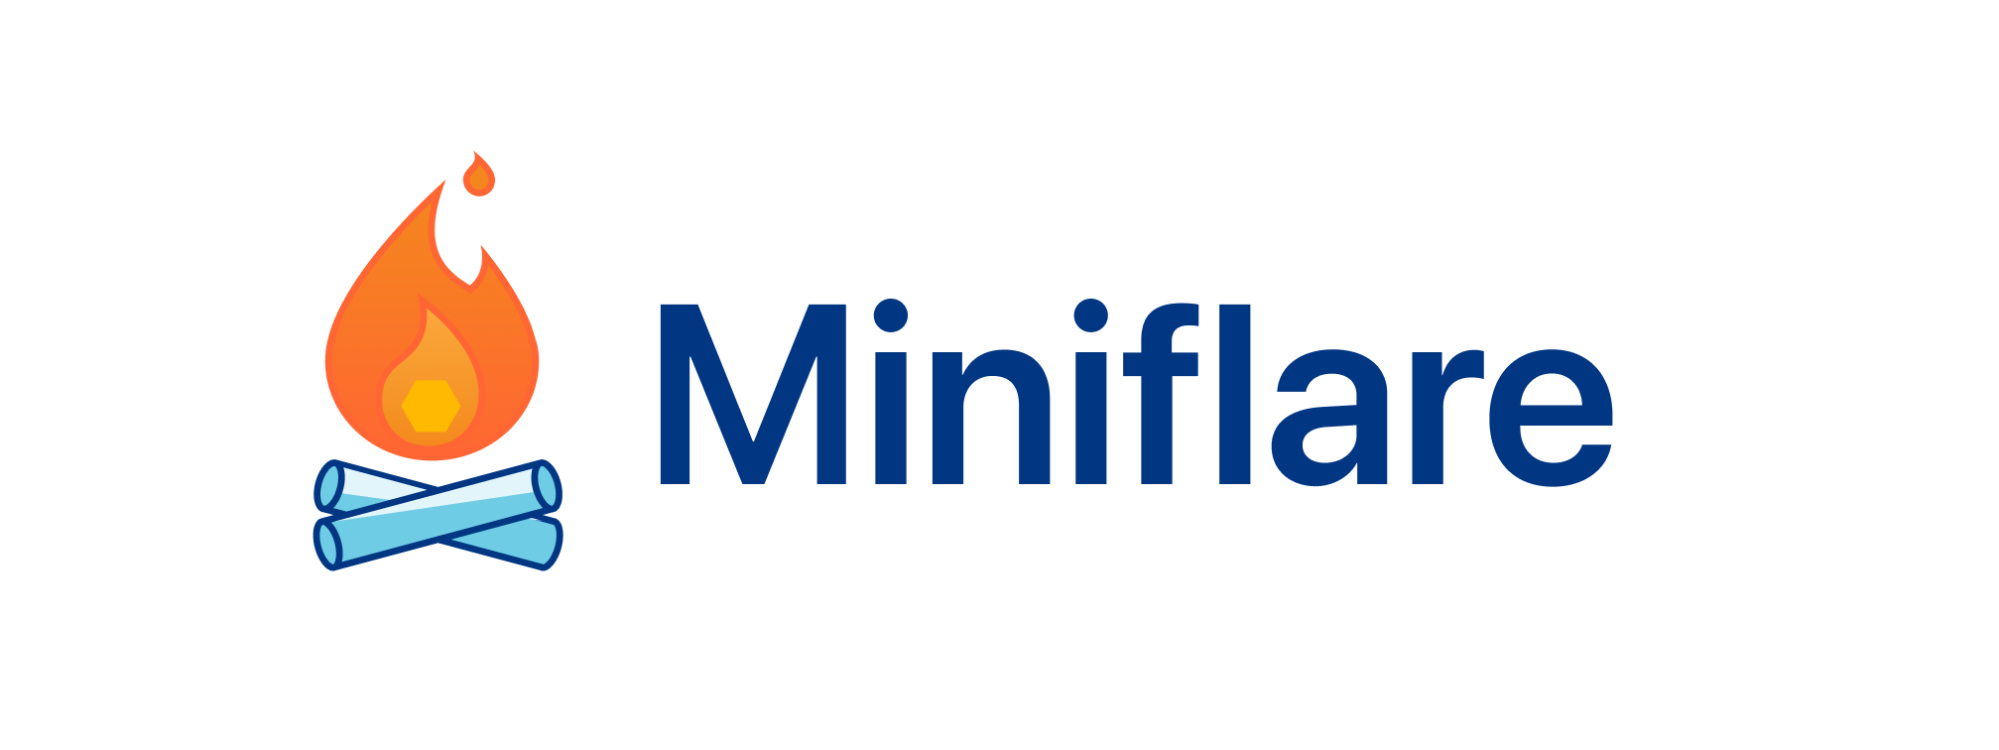 Miniflare 2.0: fully-local development and testing for Workers